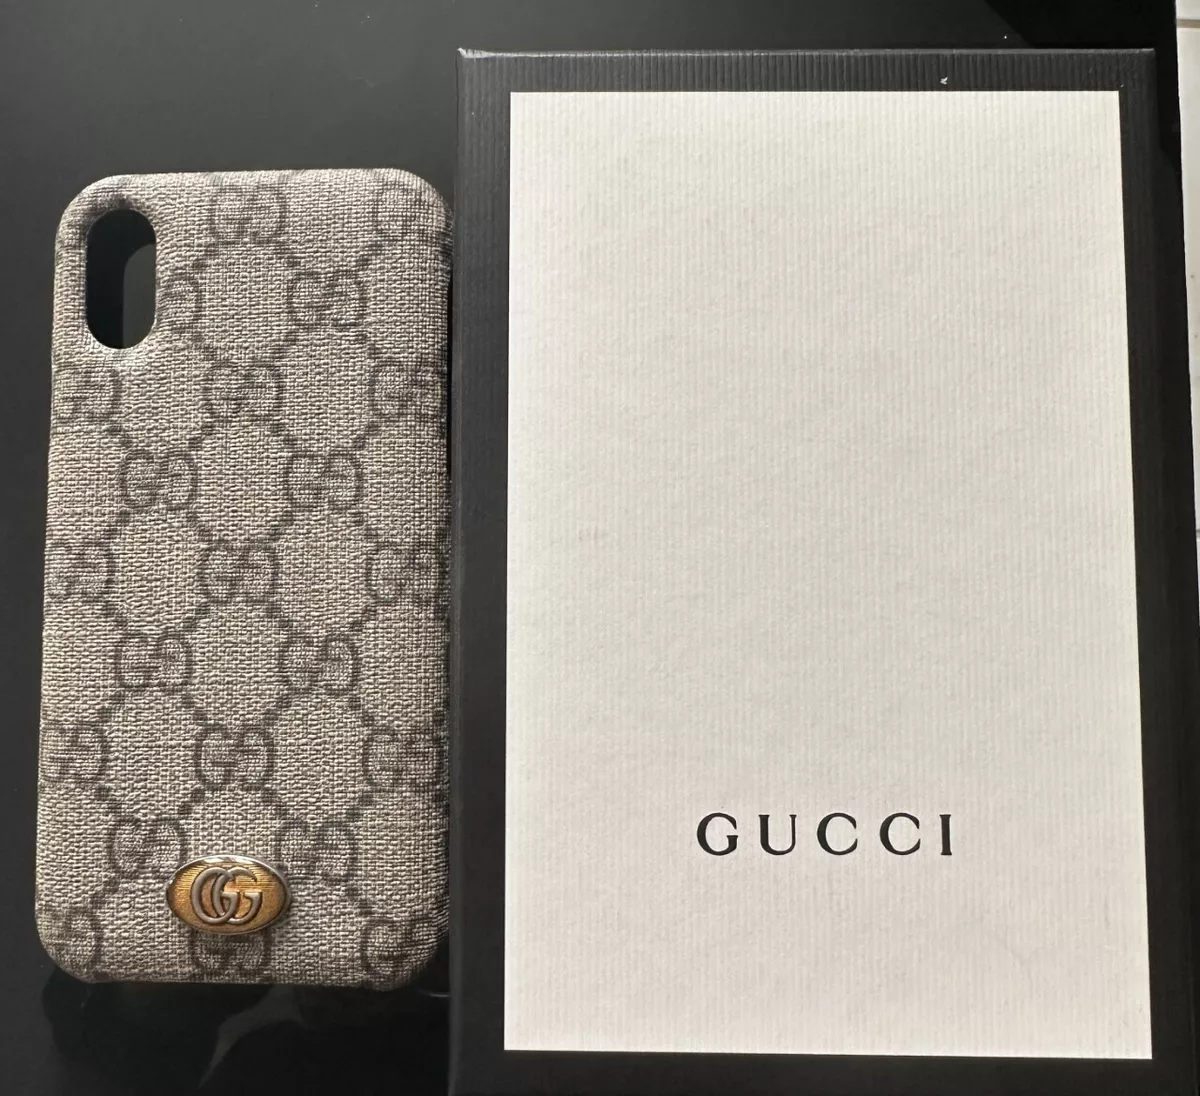 Smelte Bore frø Authentic Gucci GG Ophidia Iphone X case (no defects) | eBay